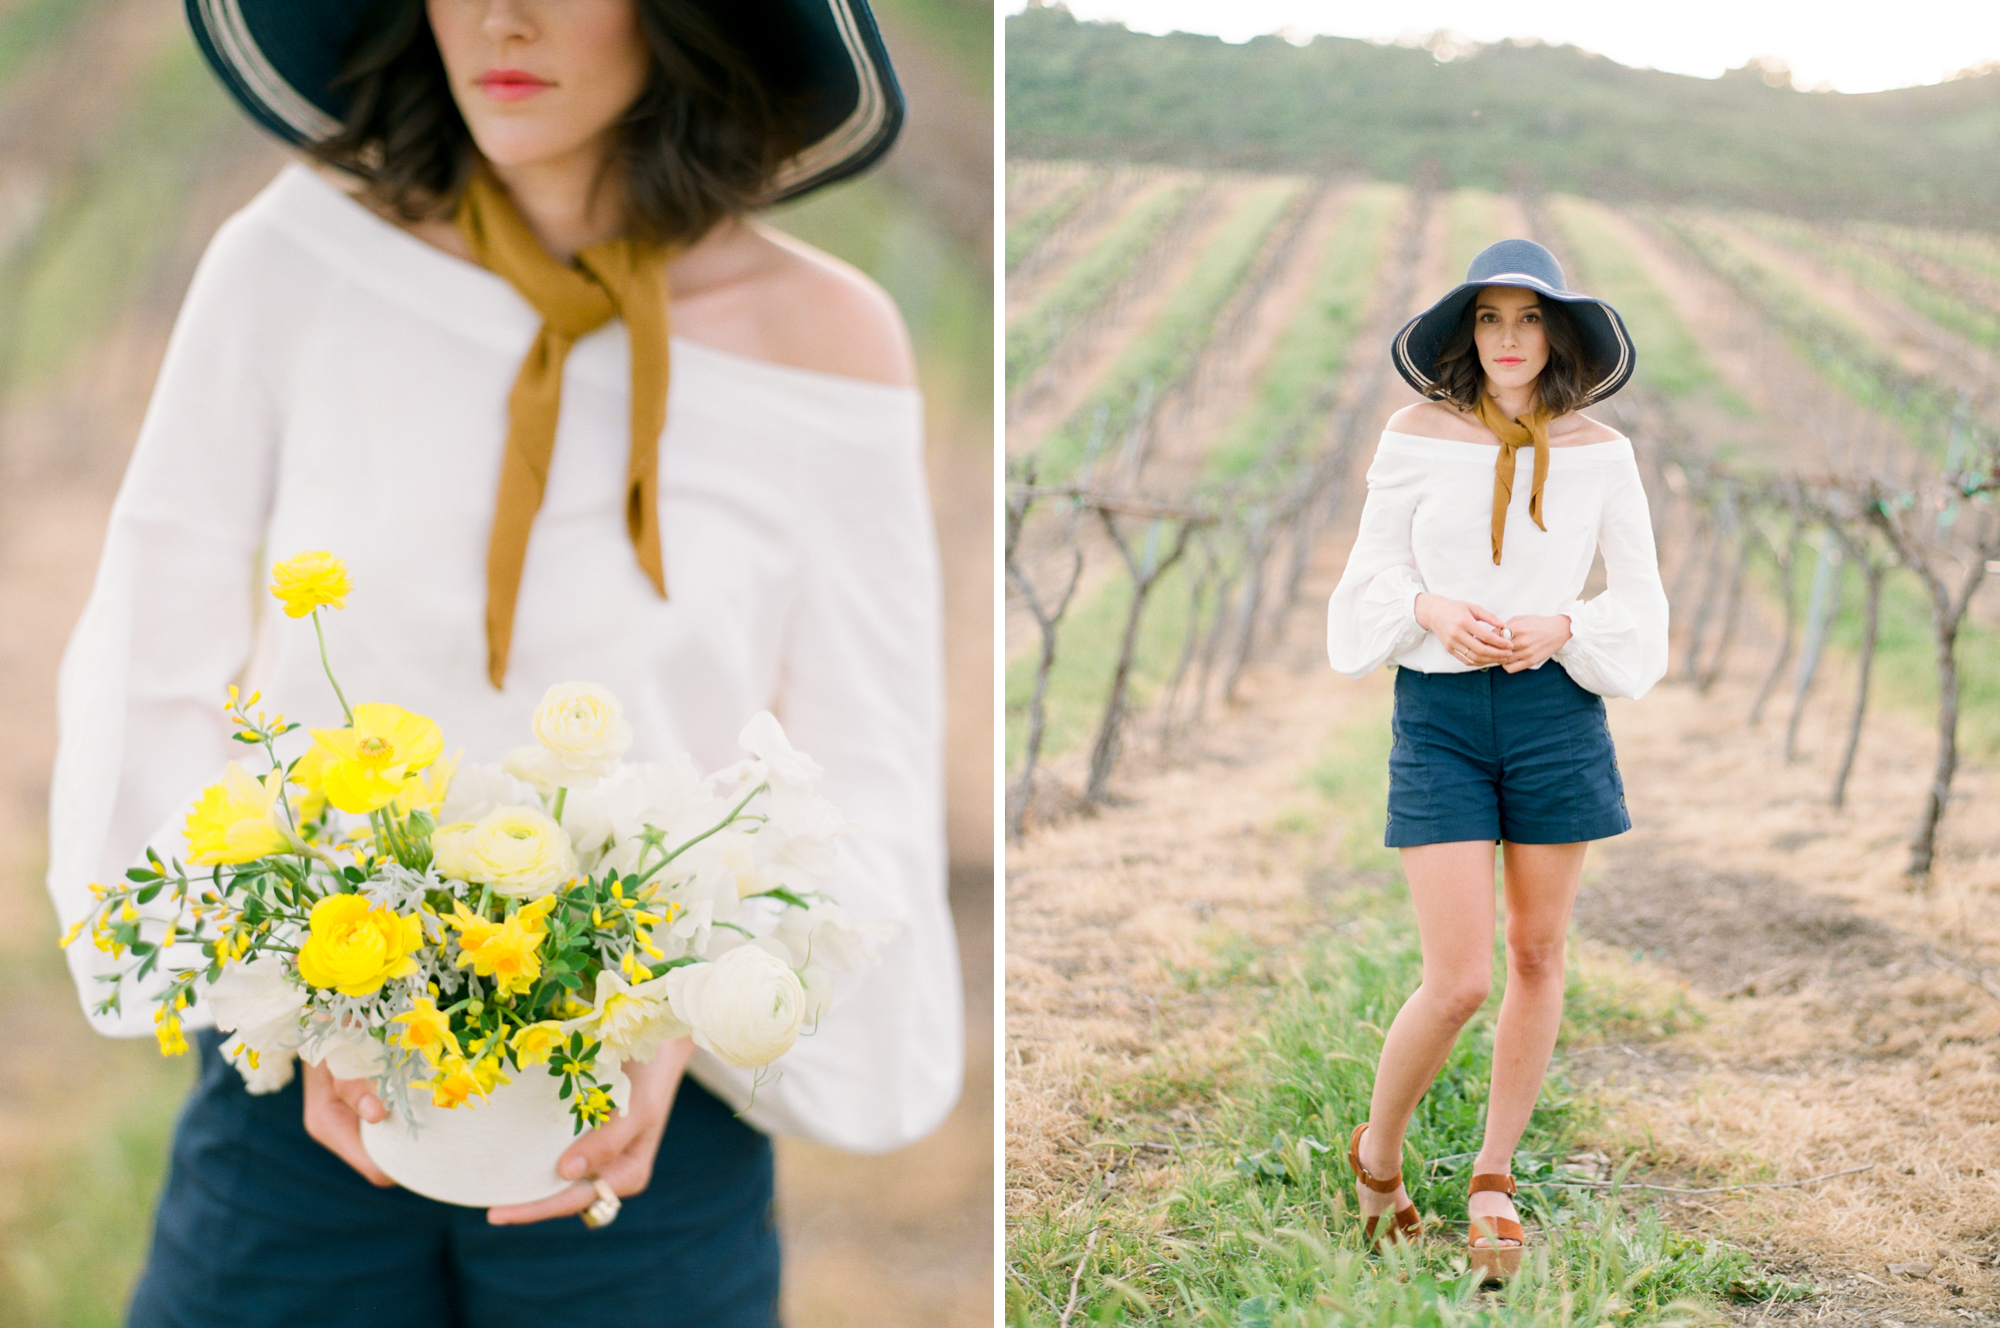 Summer Vineyard Dinner in Paso Robles, California. Styling by Kelly Oshiro. Photos by Rachel Havel